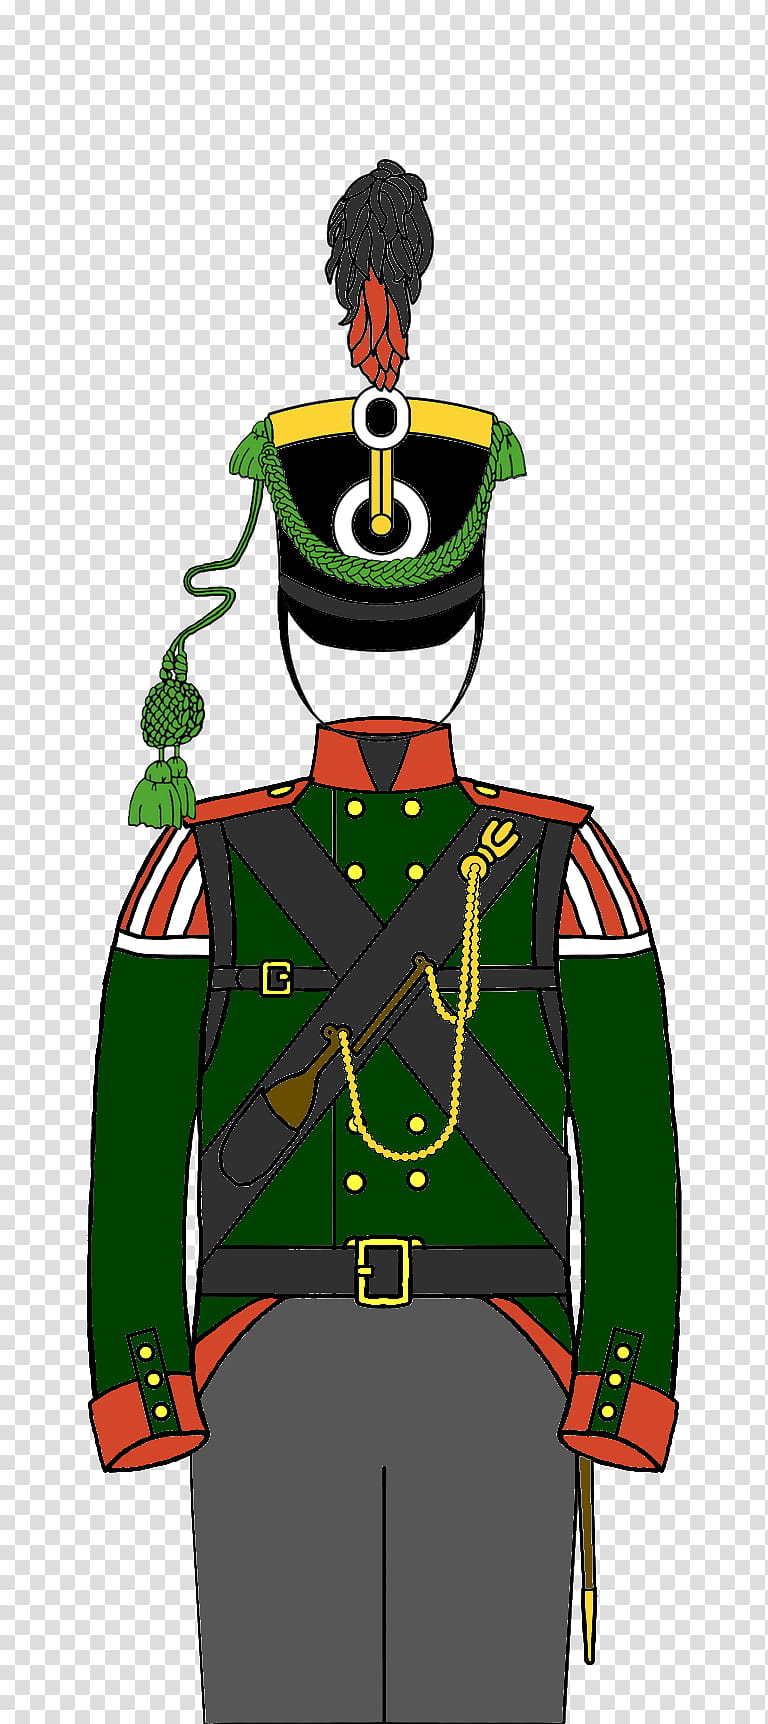 Military Uniforms Military Uniform, Military Rank, Character, Profession, Staff Capilar Y Corporal, Military Officer transparent background PNG clipart